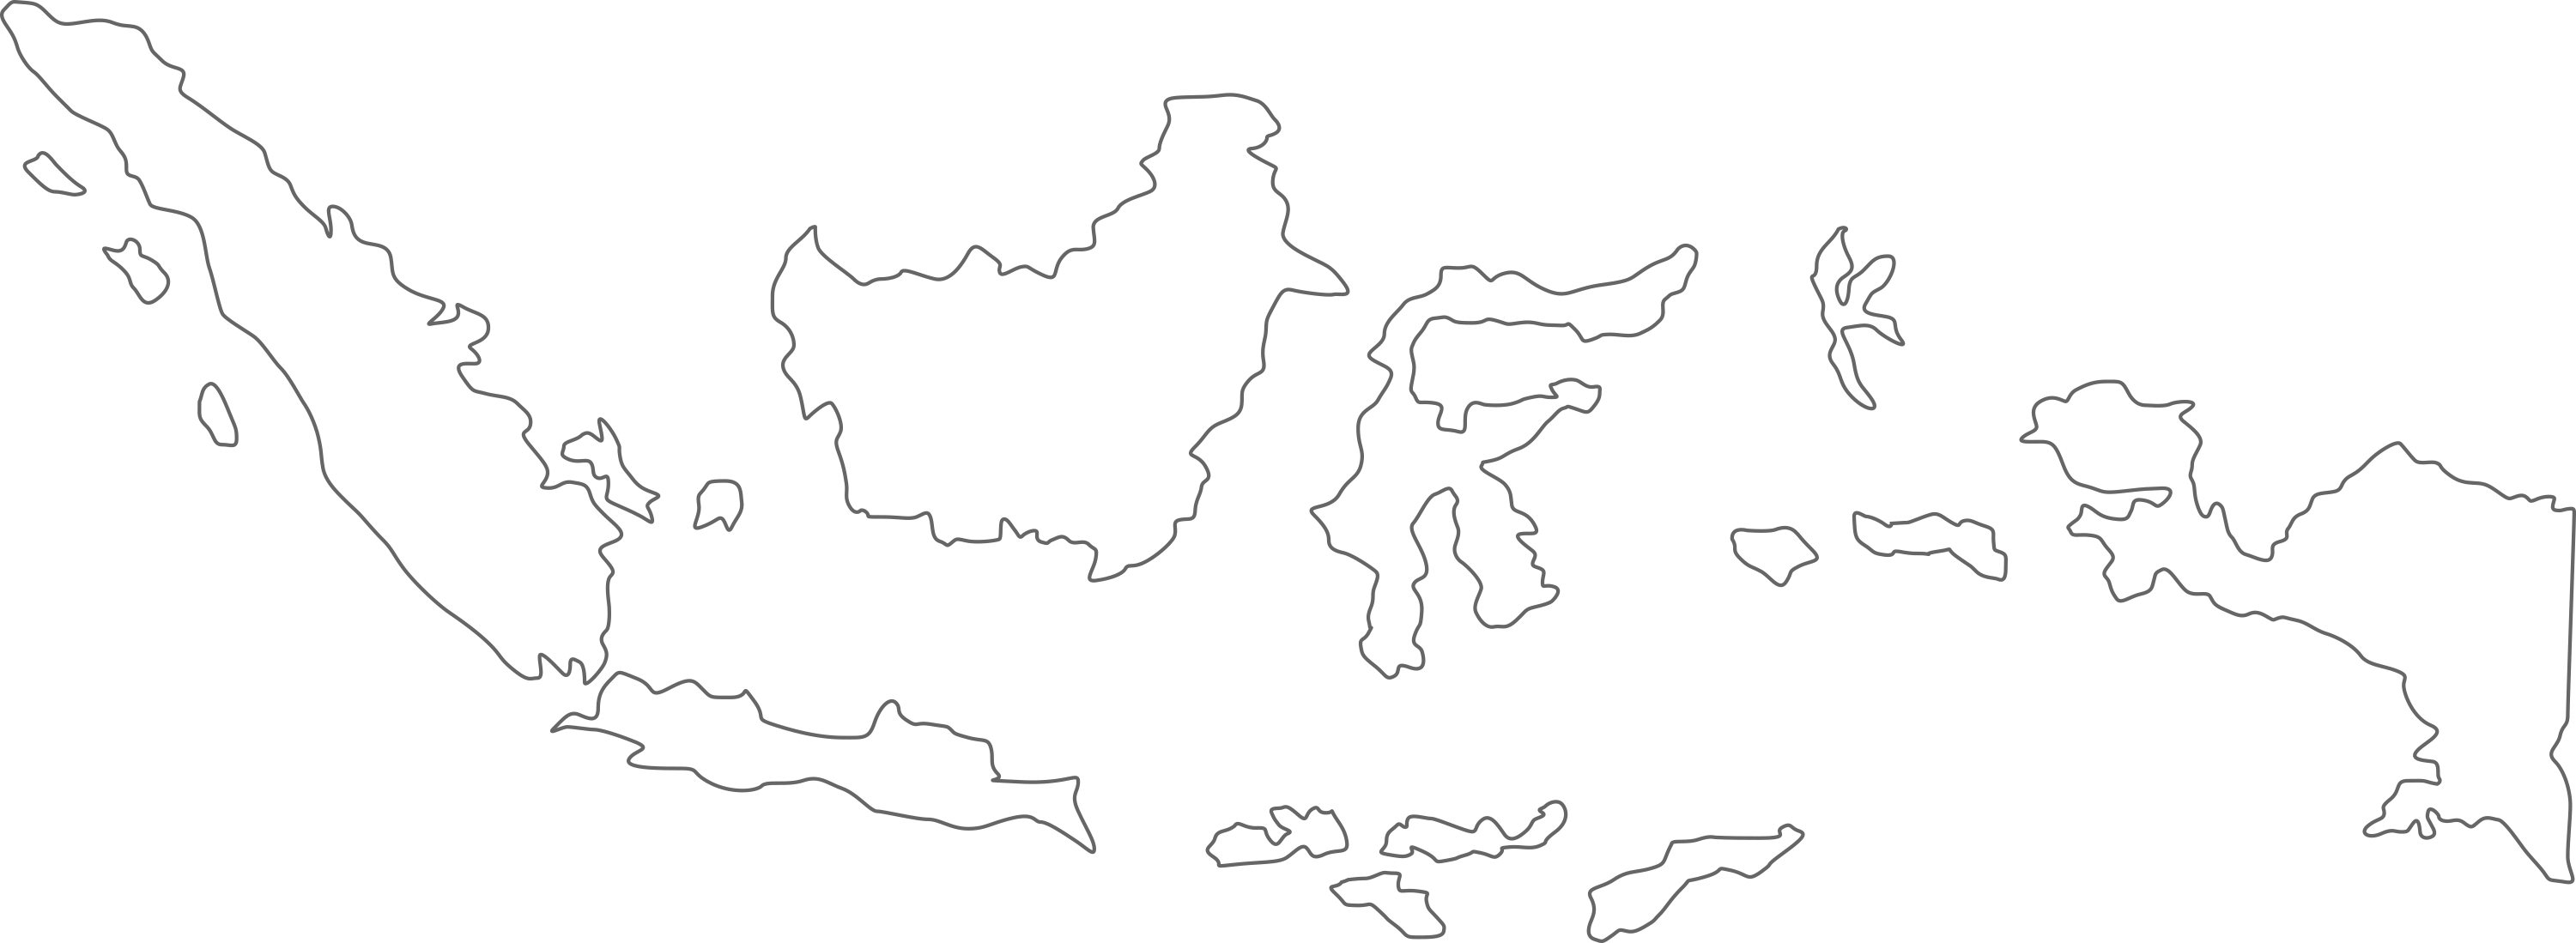 A Black Background With White Outline Of Different Countries/regions